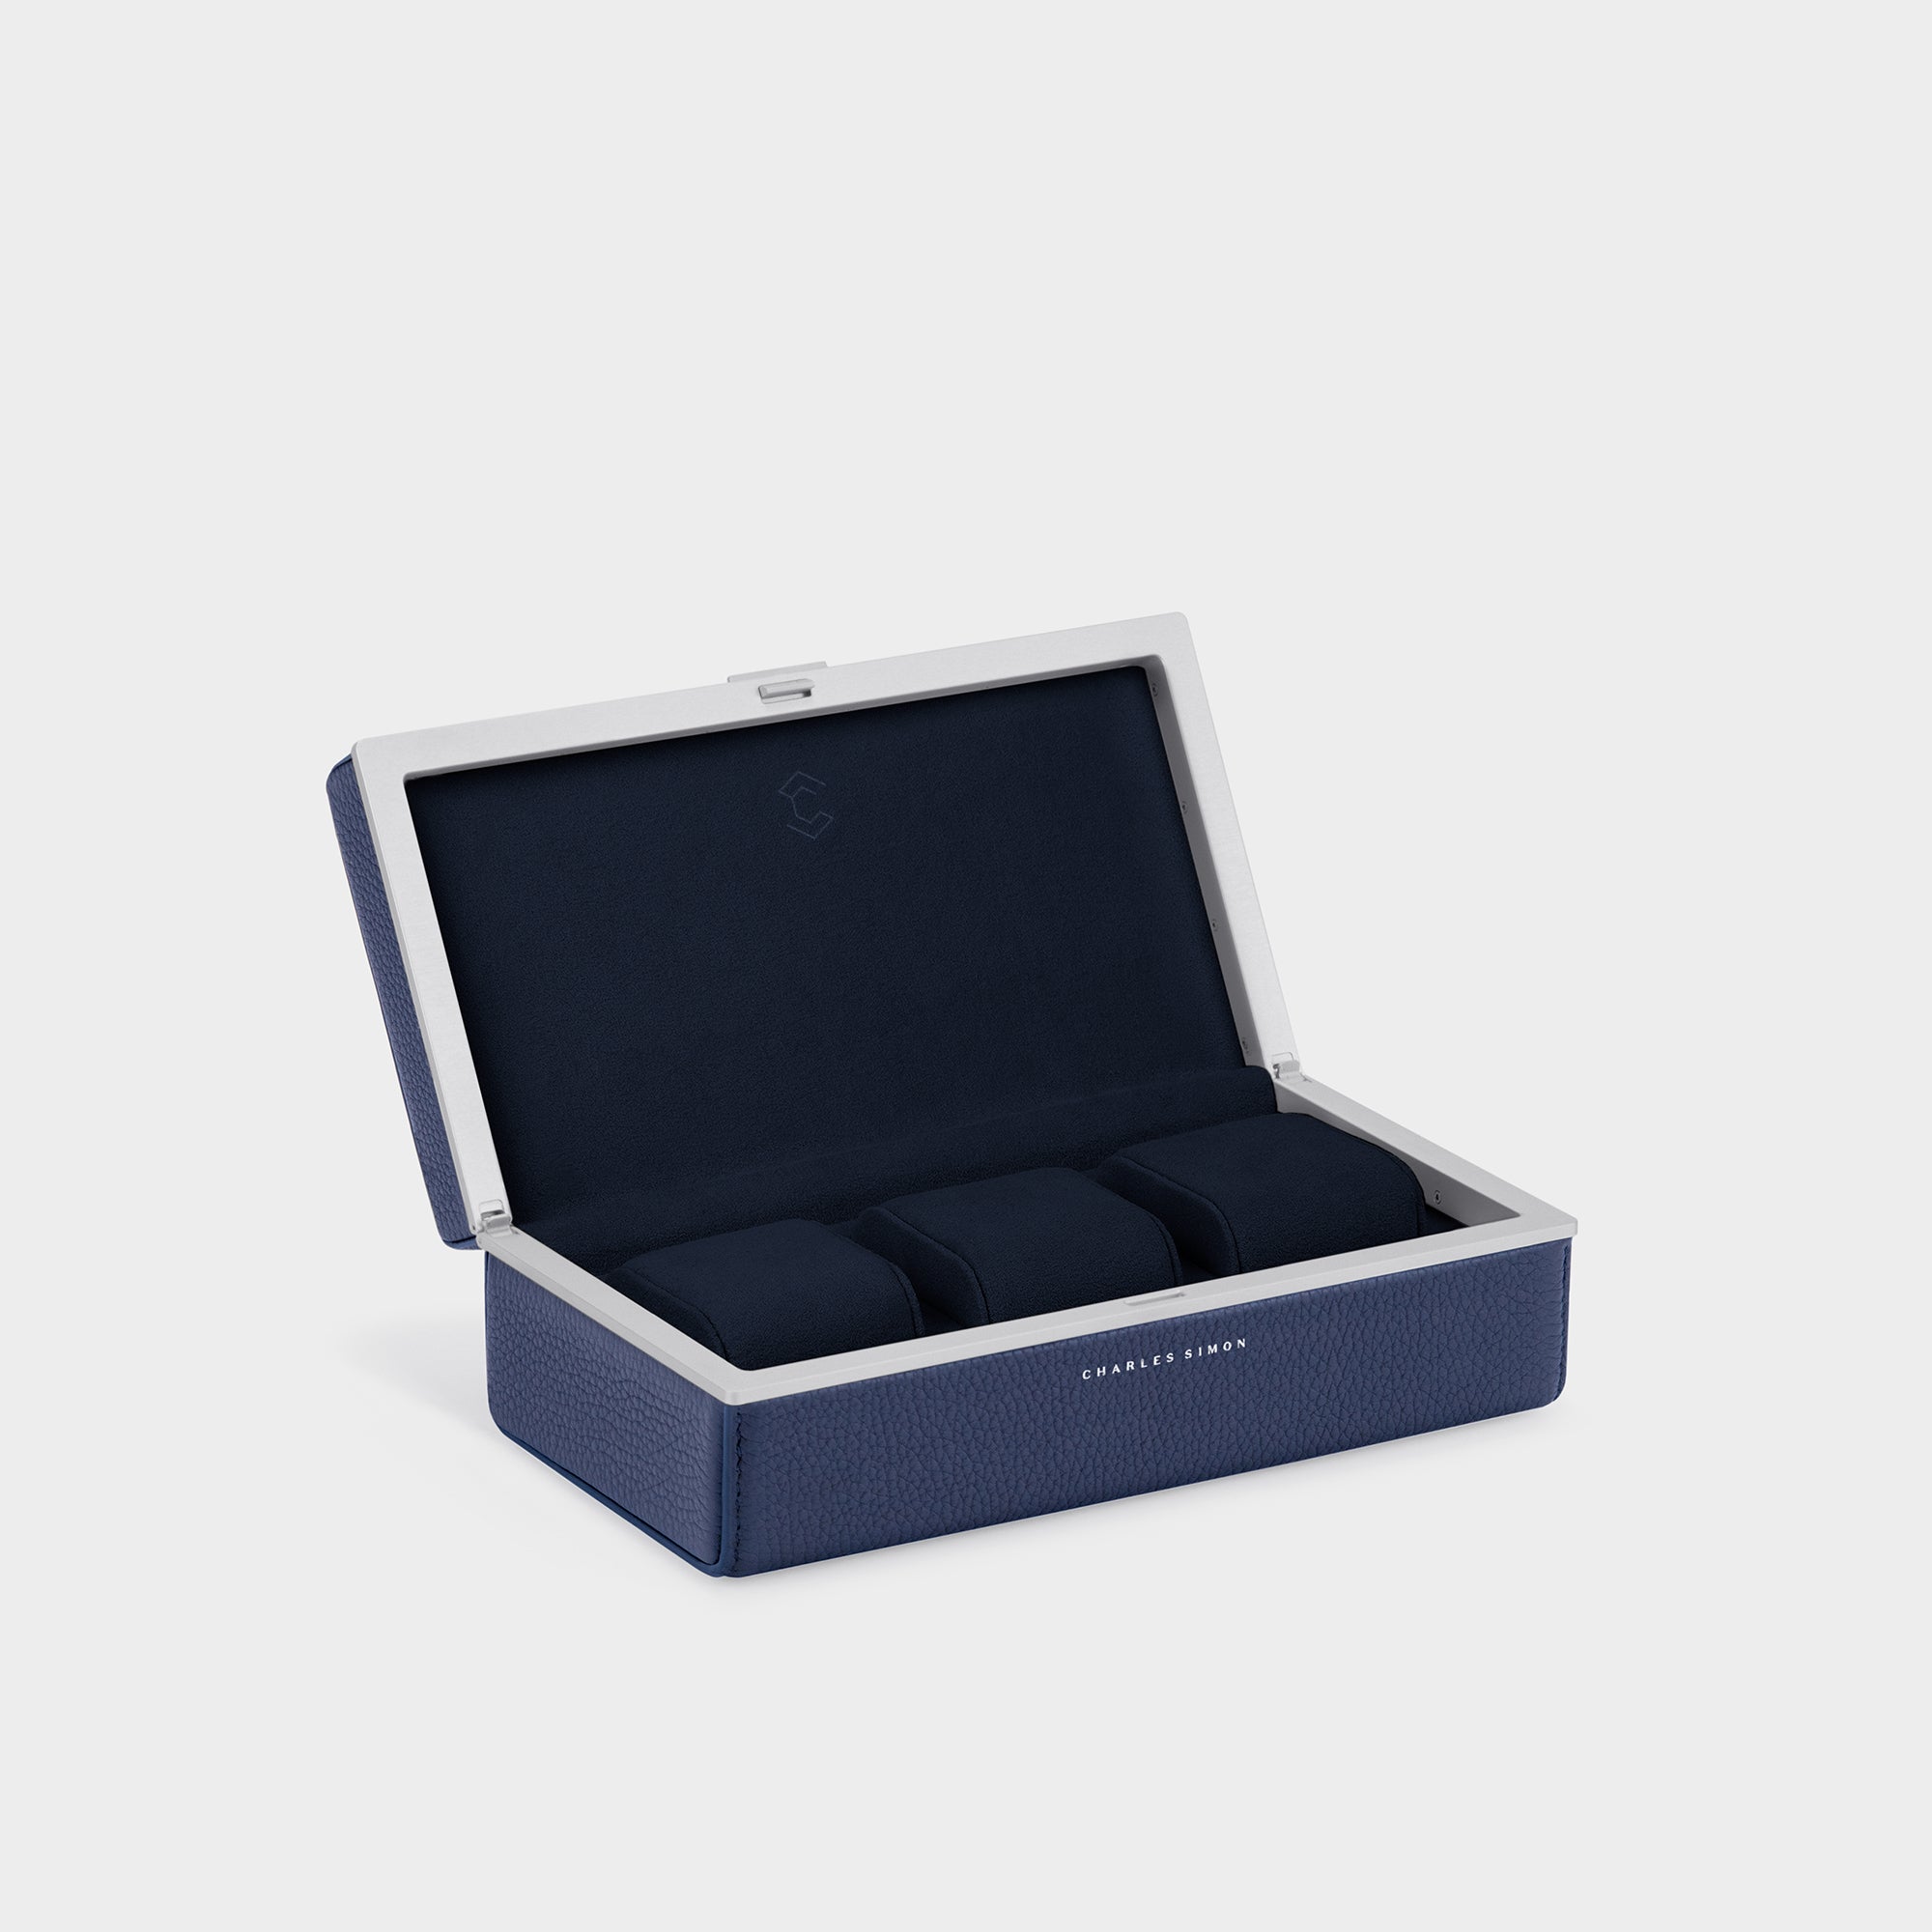 Charles Simon Eaton 3 watch case made from sapphire French leather and deep blue soft Alcantara interior lining